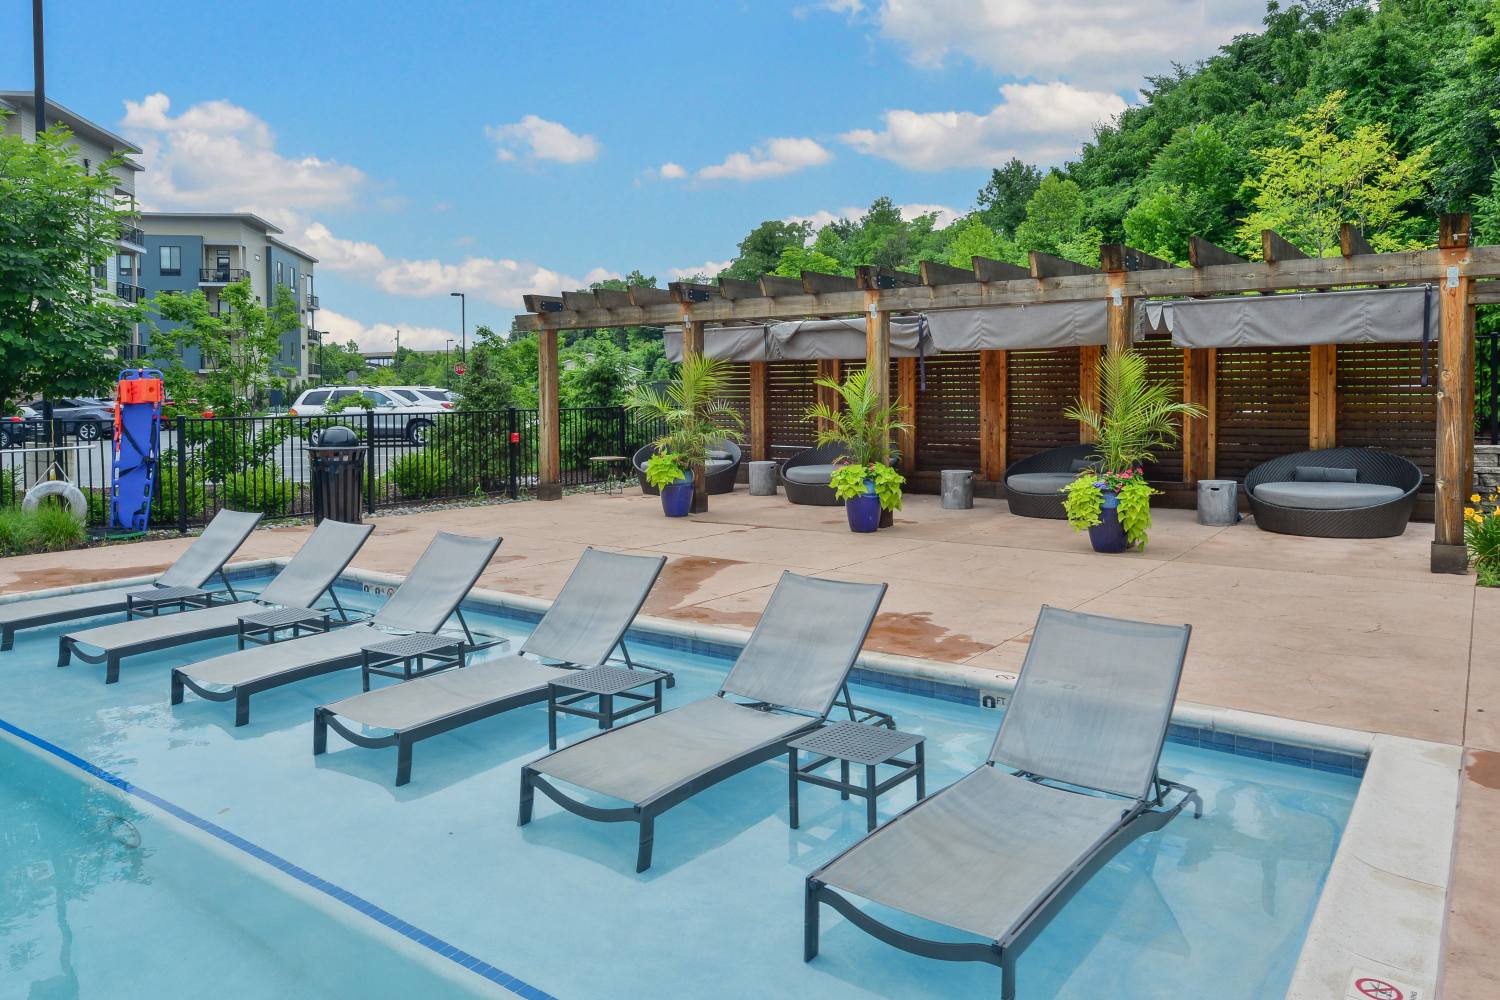 lounge seating in the pool at Riverworks in Phoenixville, Pennsylvania